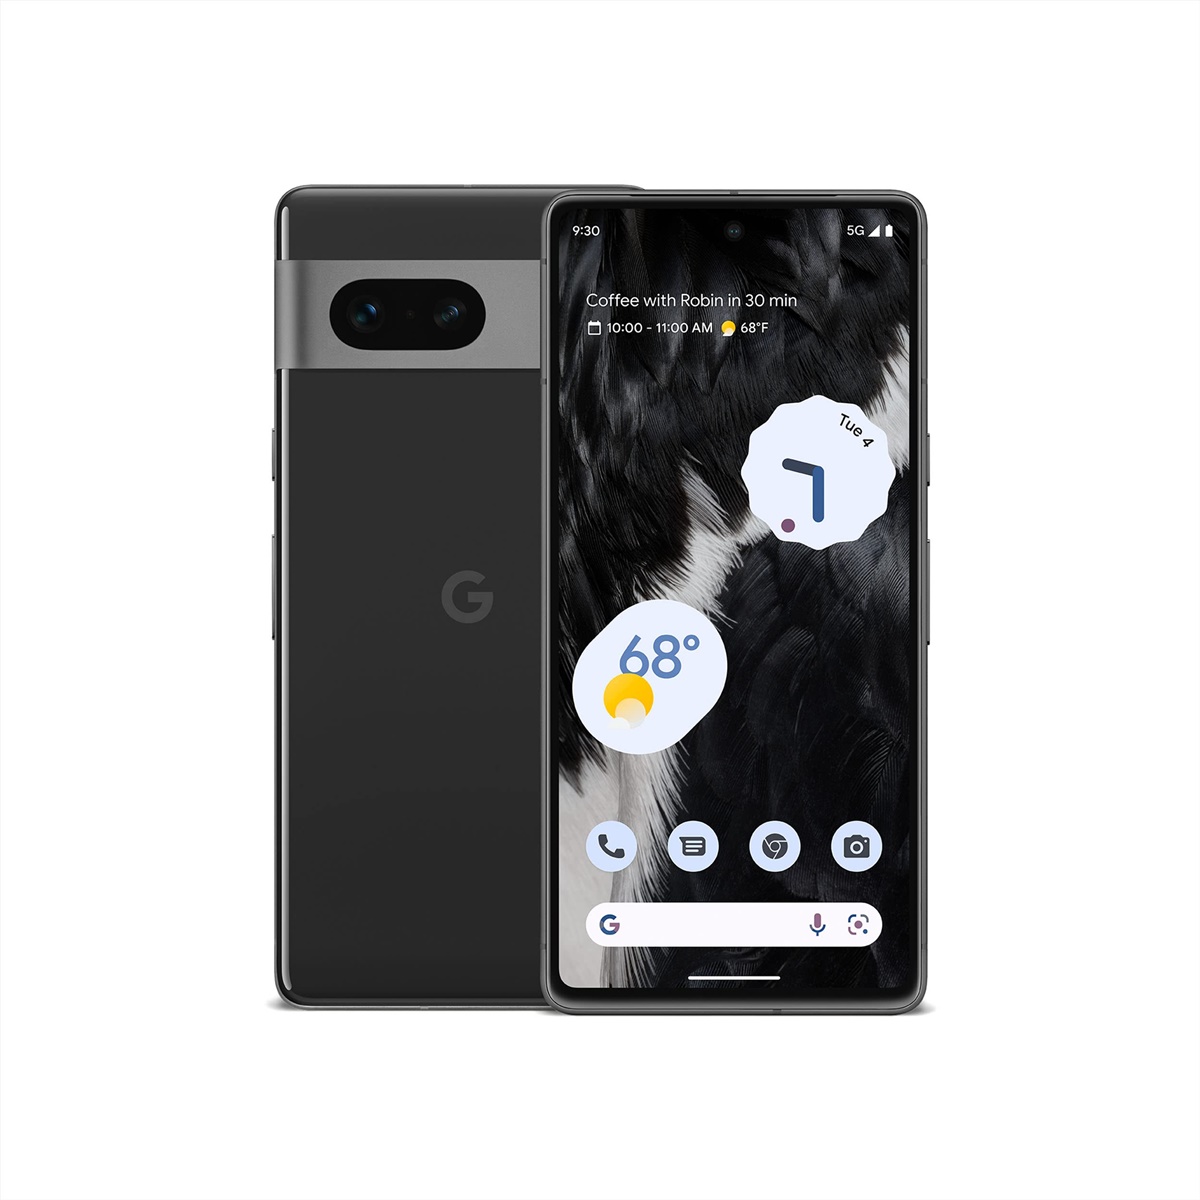 Google Pixel 7 Released 2022, October 13, 197g, 8.7mm thickness, Android 13, up to Android 14, 128GB/256GB storage, no card slot, 6.3"1080x2400 pixels, 50MP2160p, 8GB RAMGoogle Tensor G2, 4355mAh20W21W